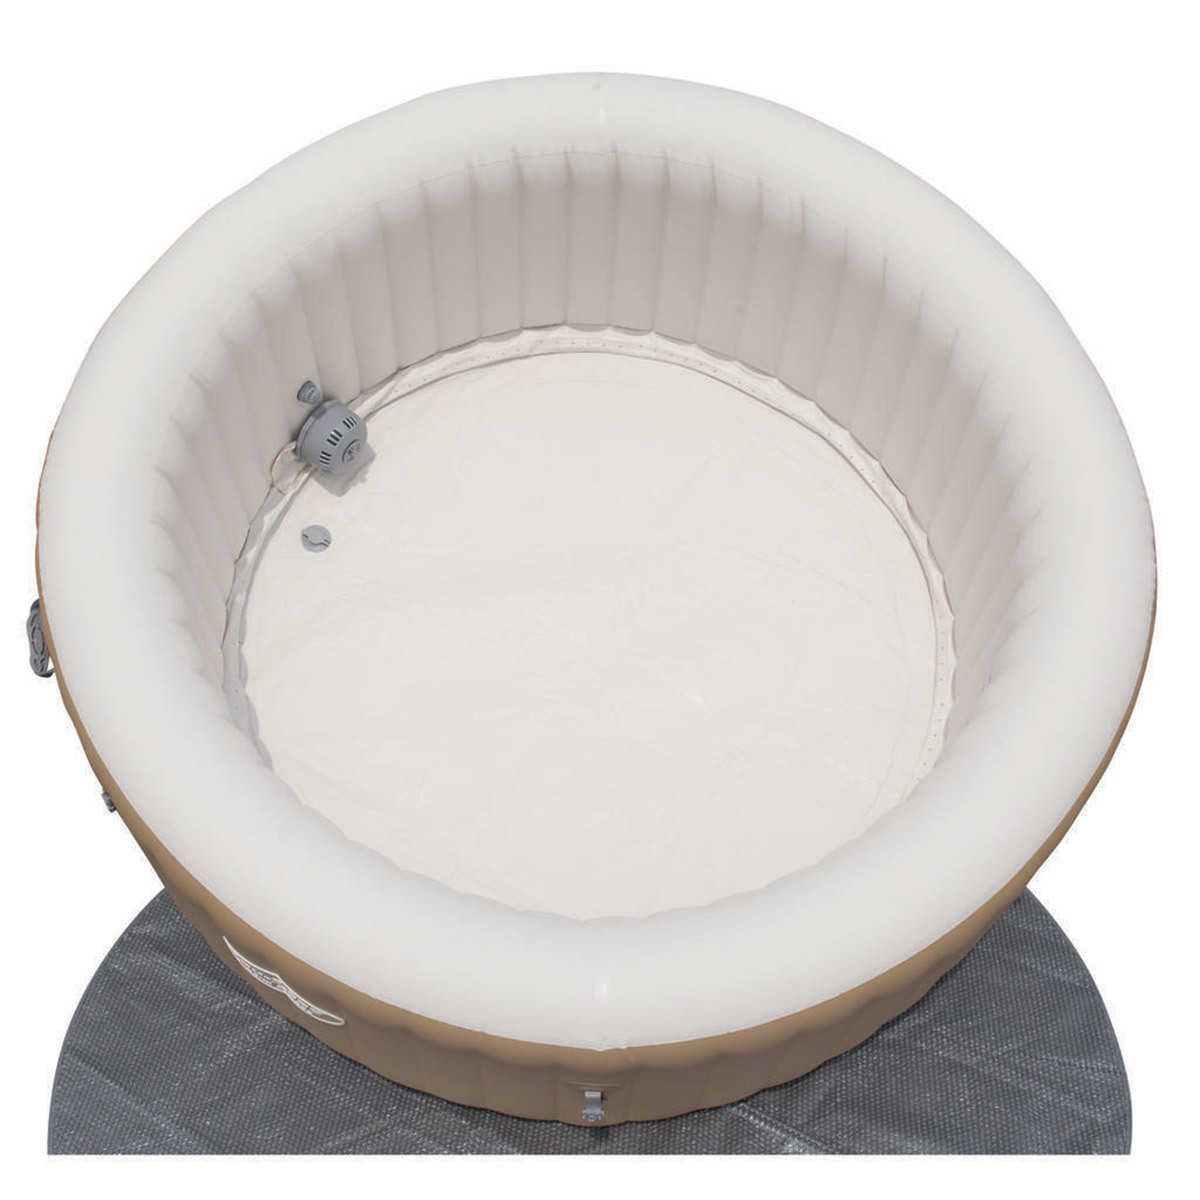 Spa Rond gonflable LAY-Z-SPA PALM SPRINGS AIRJET